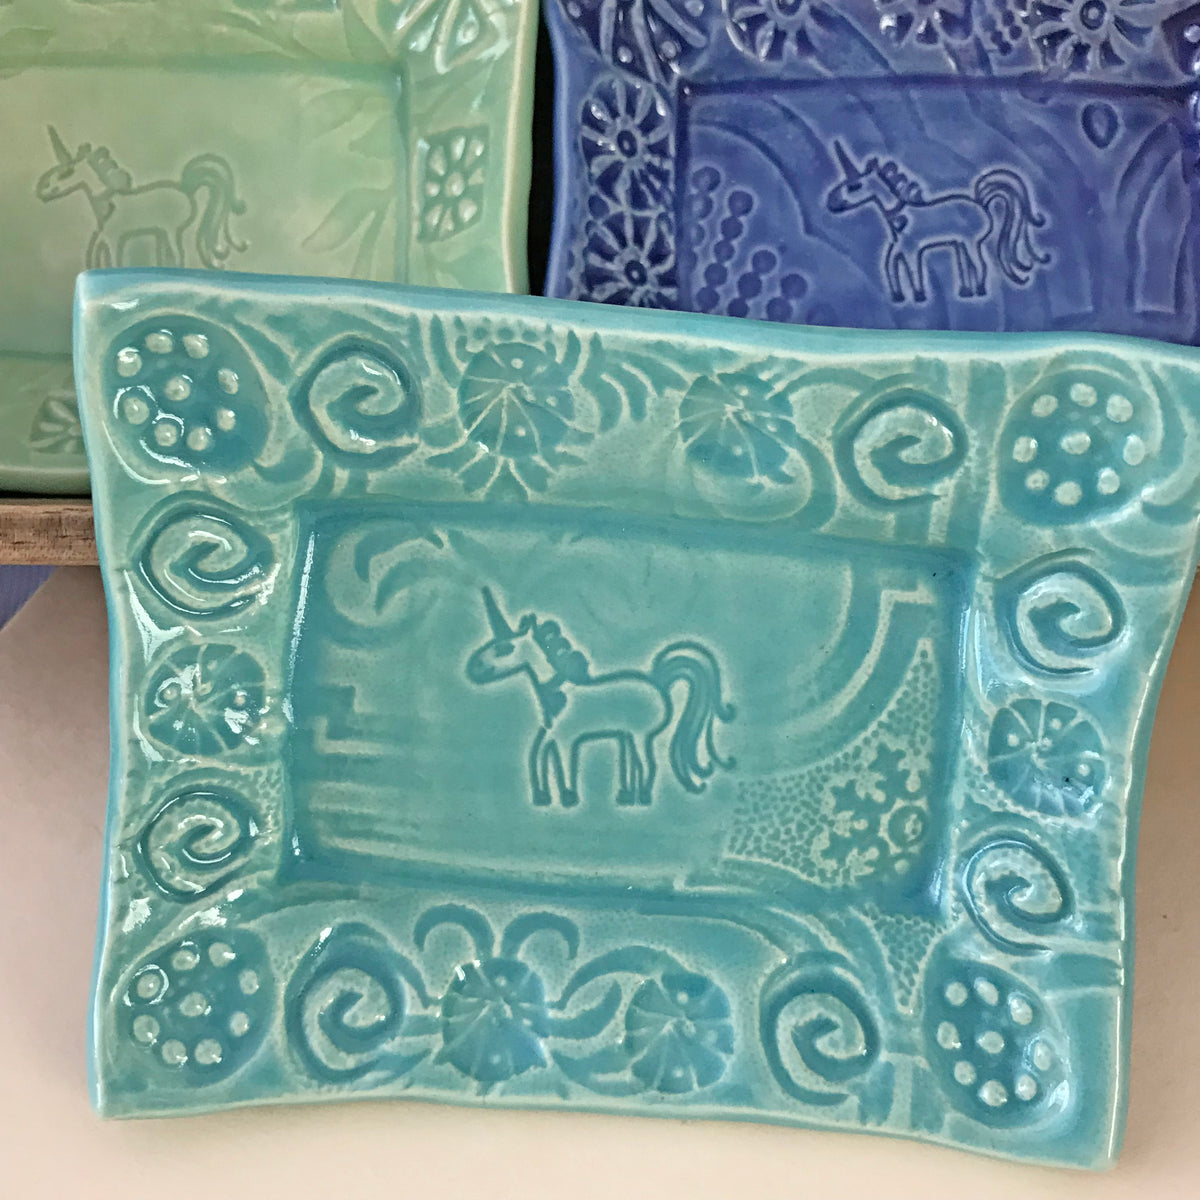 Unicorn Dishes designed for collectors.  Inspired by unicorn images from ancient times, including roman coins, Christian symbolism and manuscripts.  Handmade ceramic. 